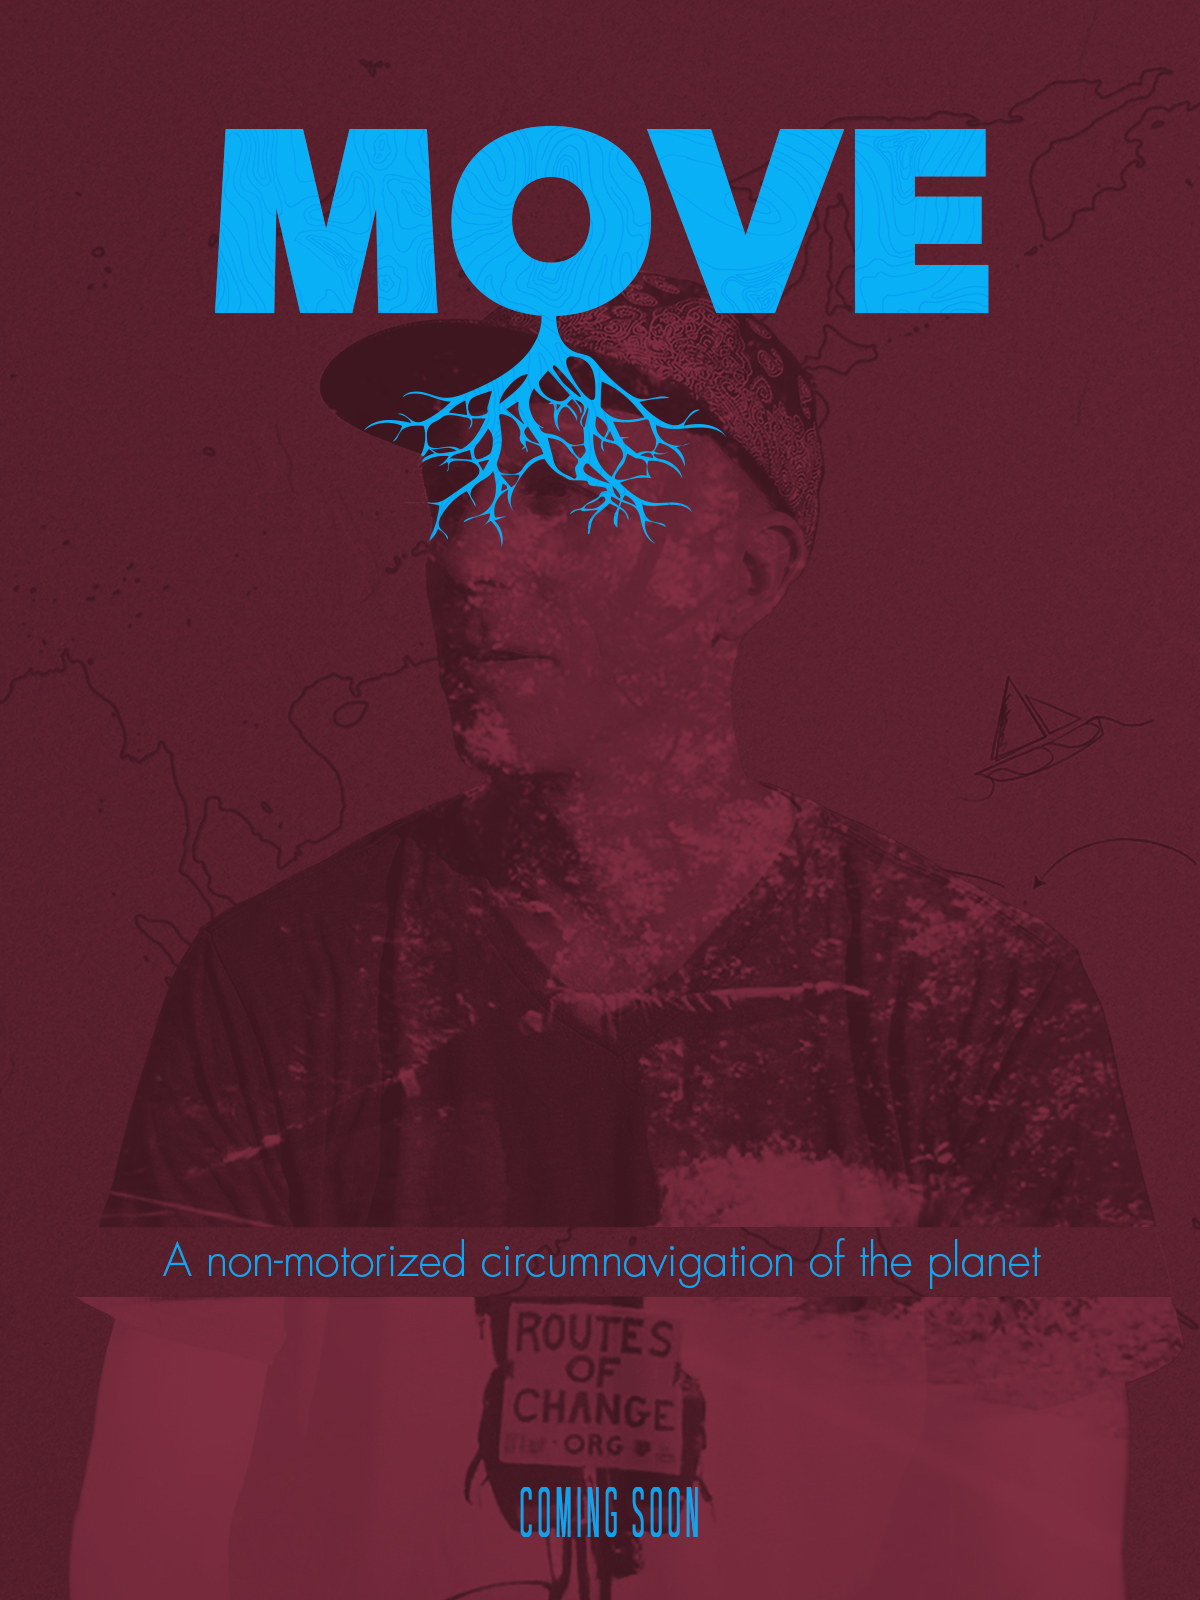 Move - A non-motorized circumnavigation of the planet